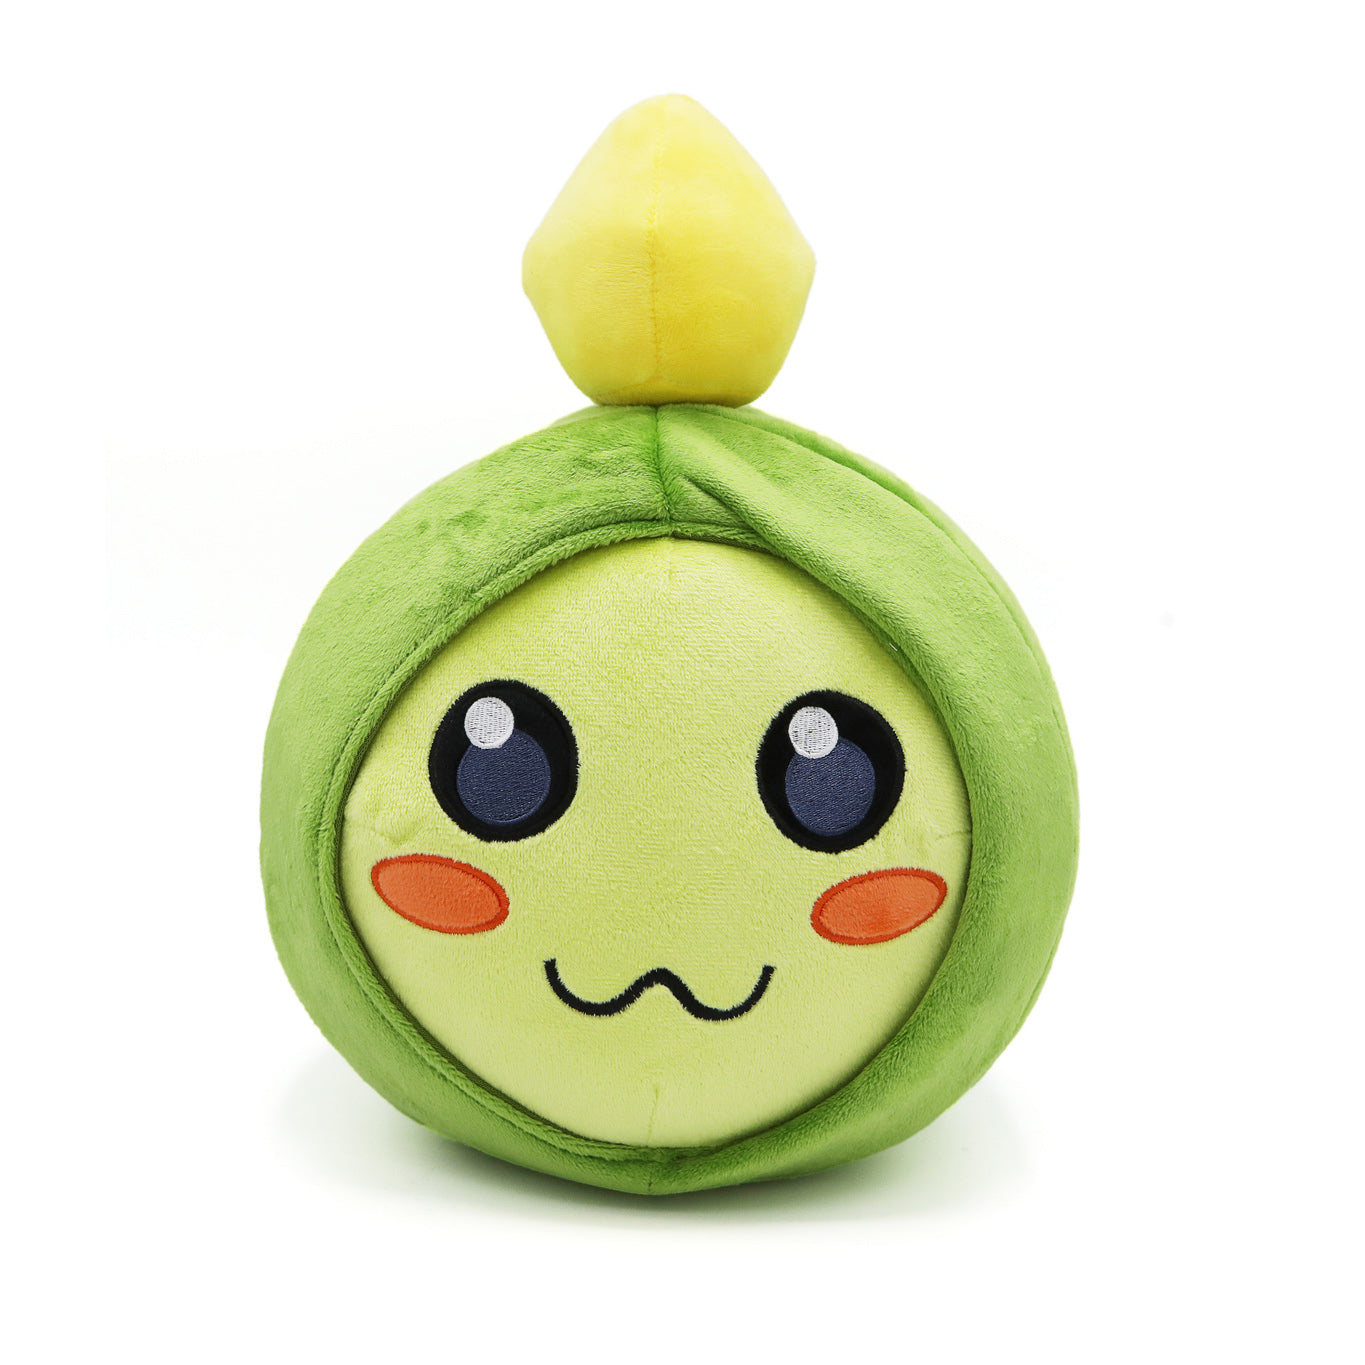 Green slime blushing pilfer plush with gold plush on its head on white background.